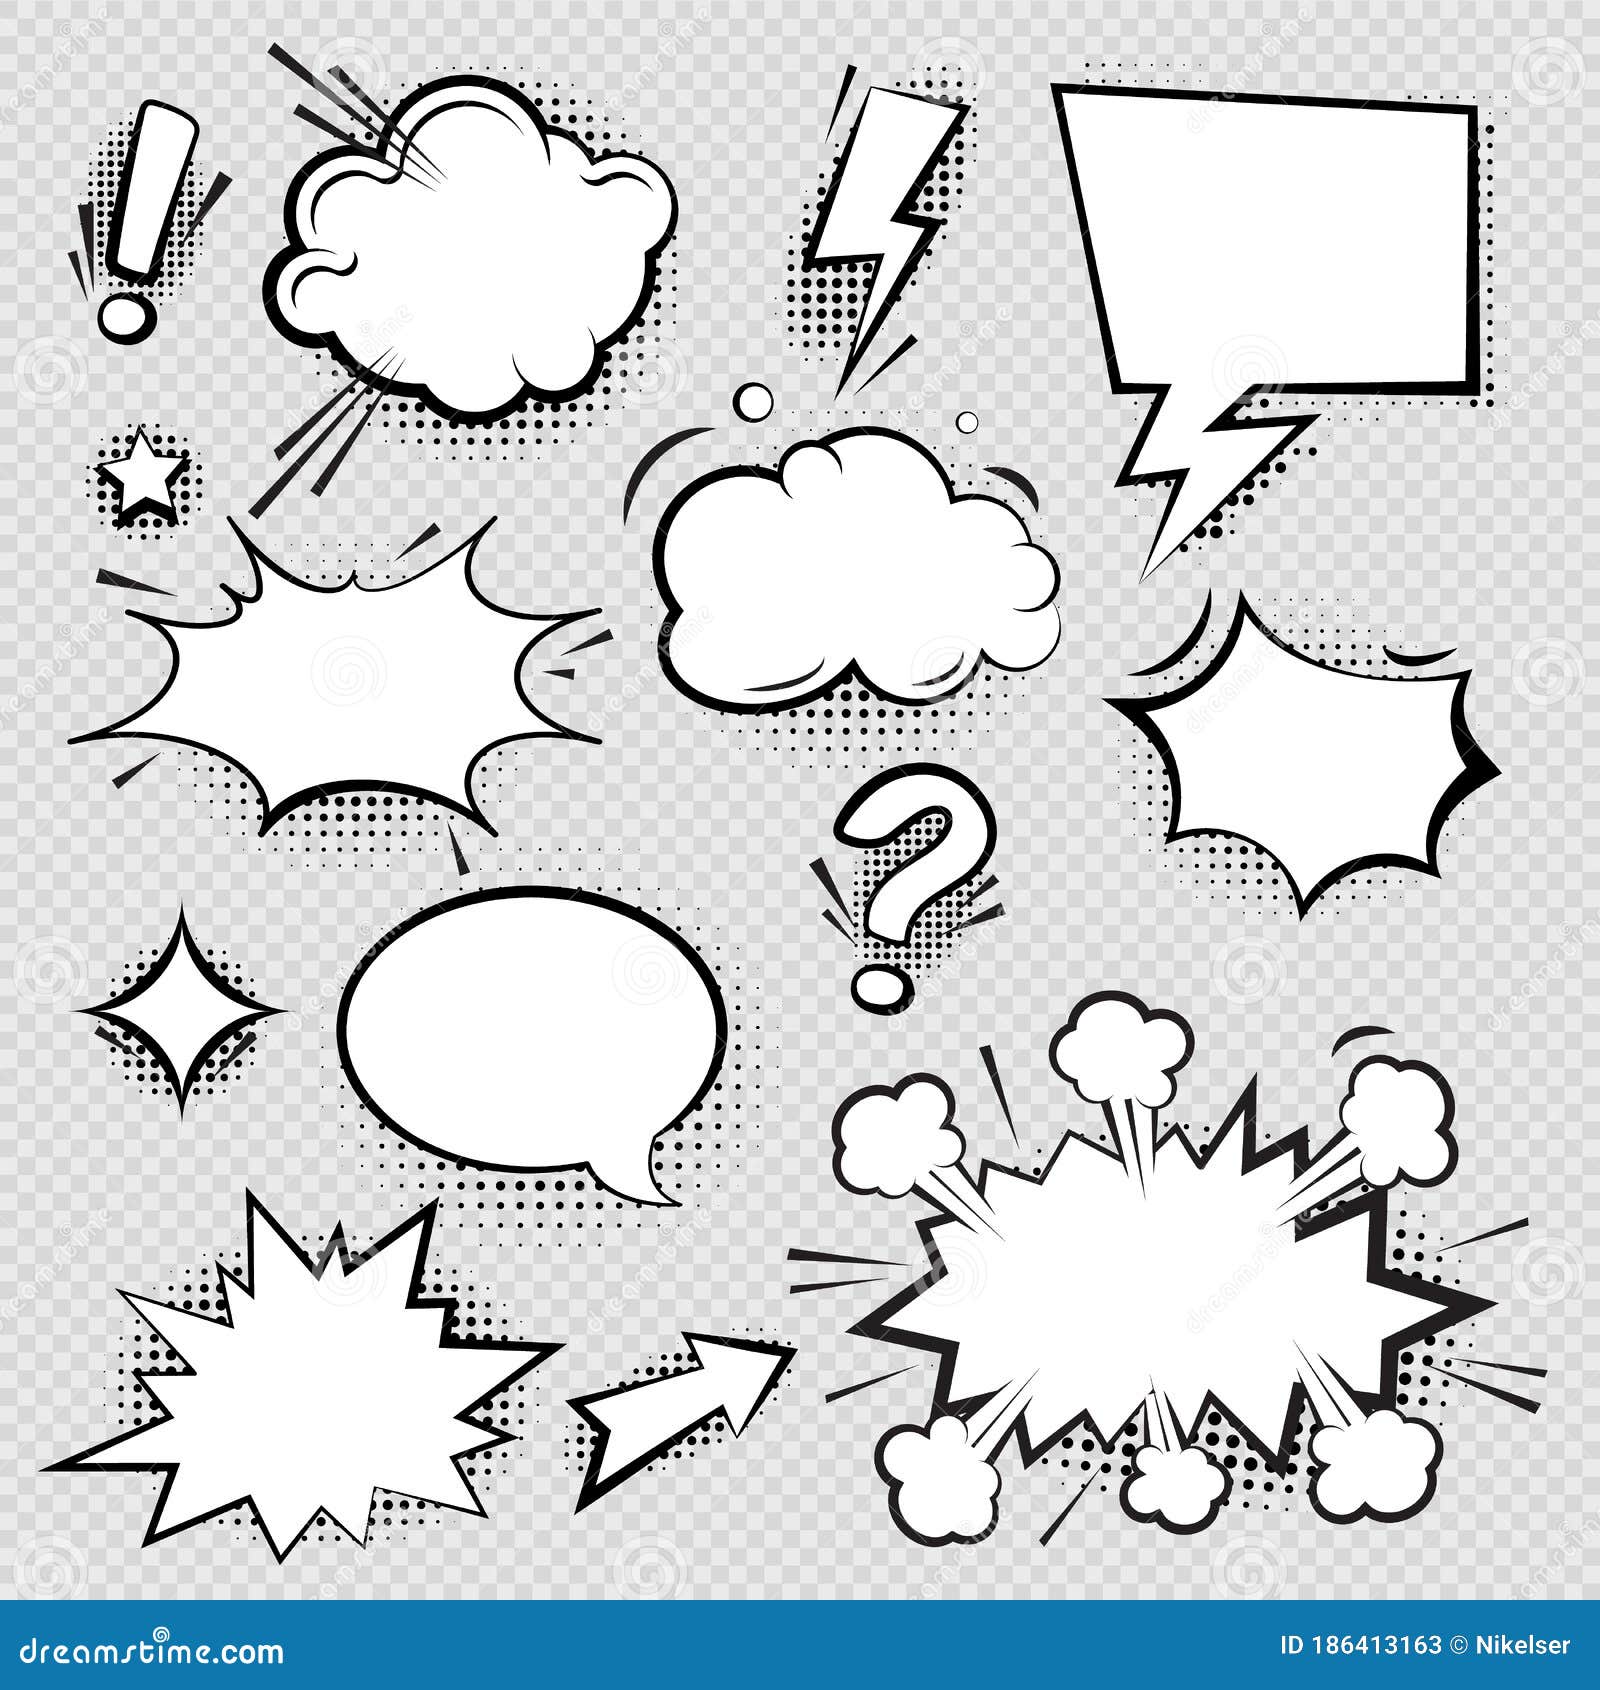 set of comic speech bubbles and s with halftone shadow effect in transparent background. comic bubble collection